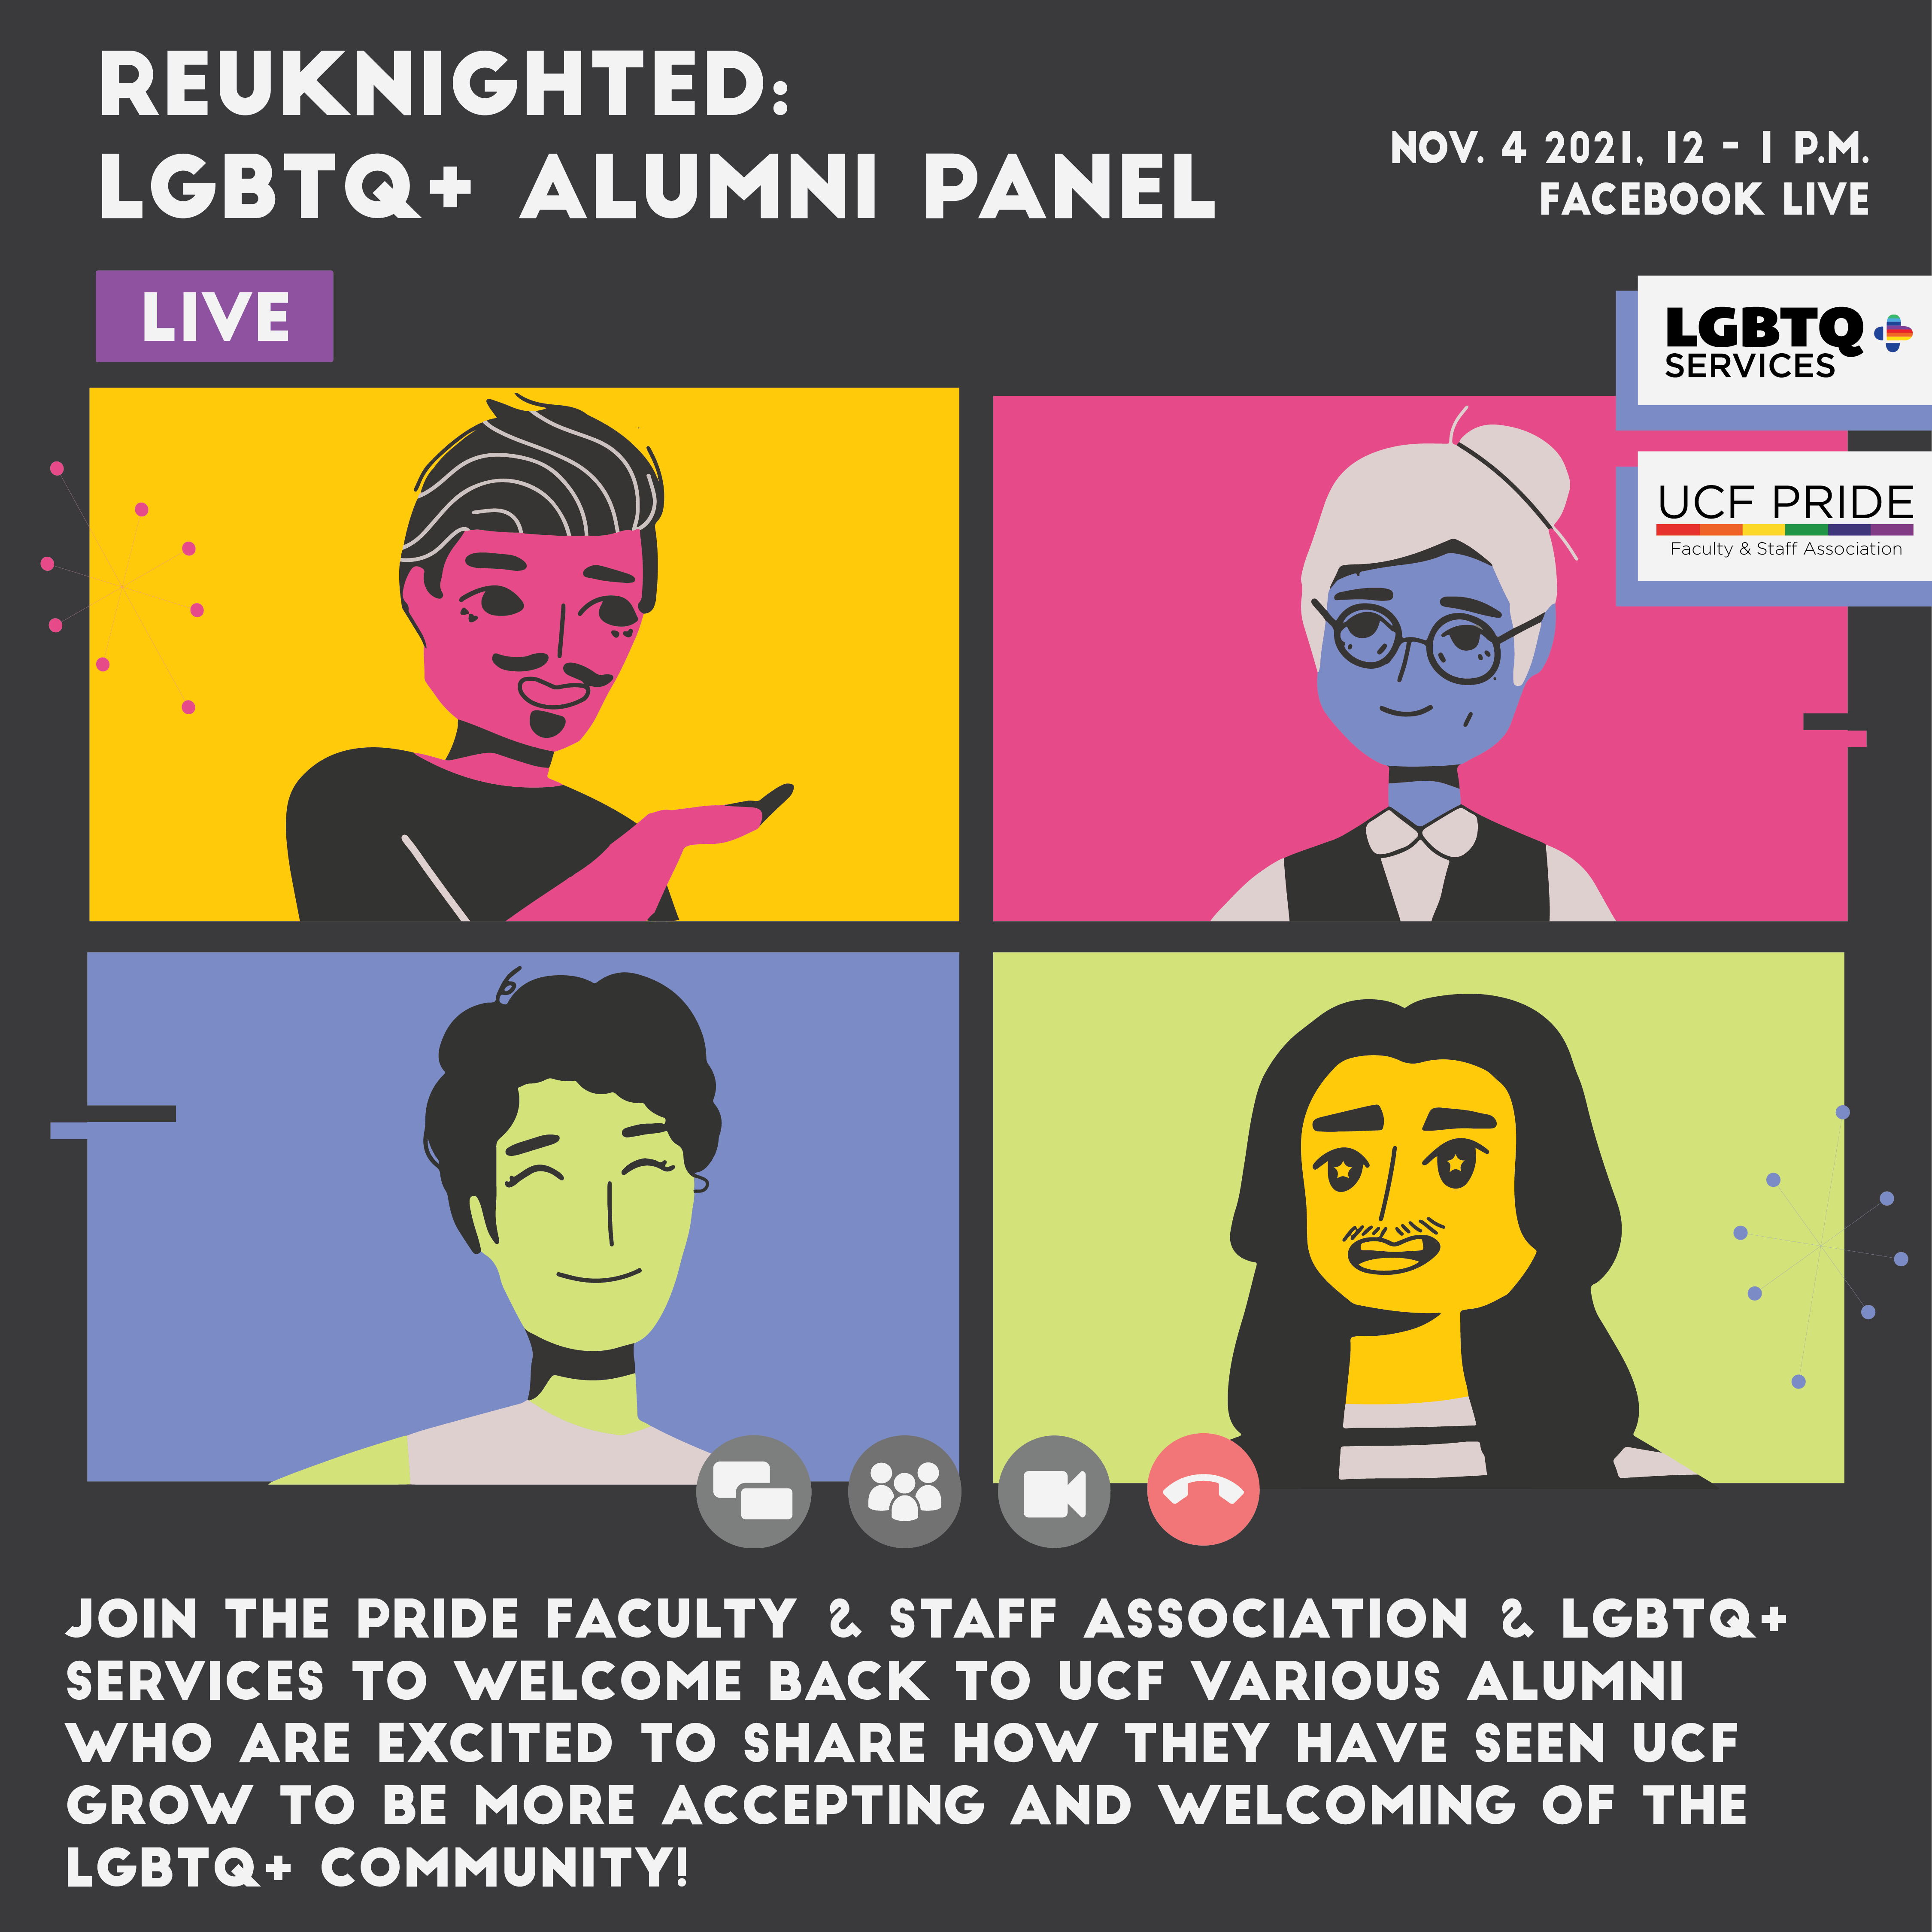 Reuknighted:lgbt q&a panel, 4 people on zoom talking